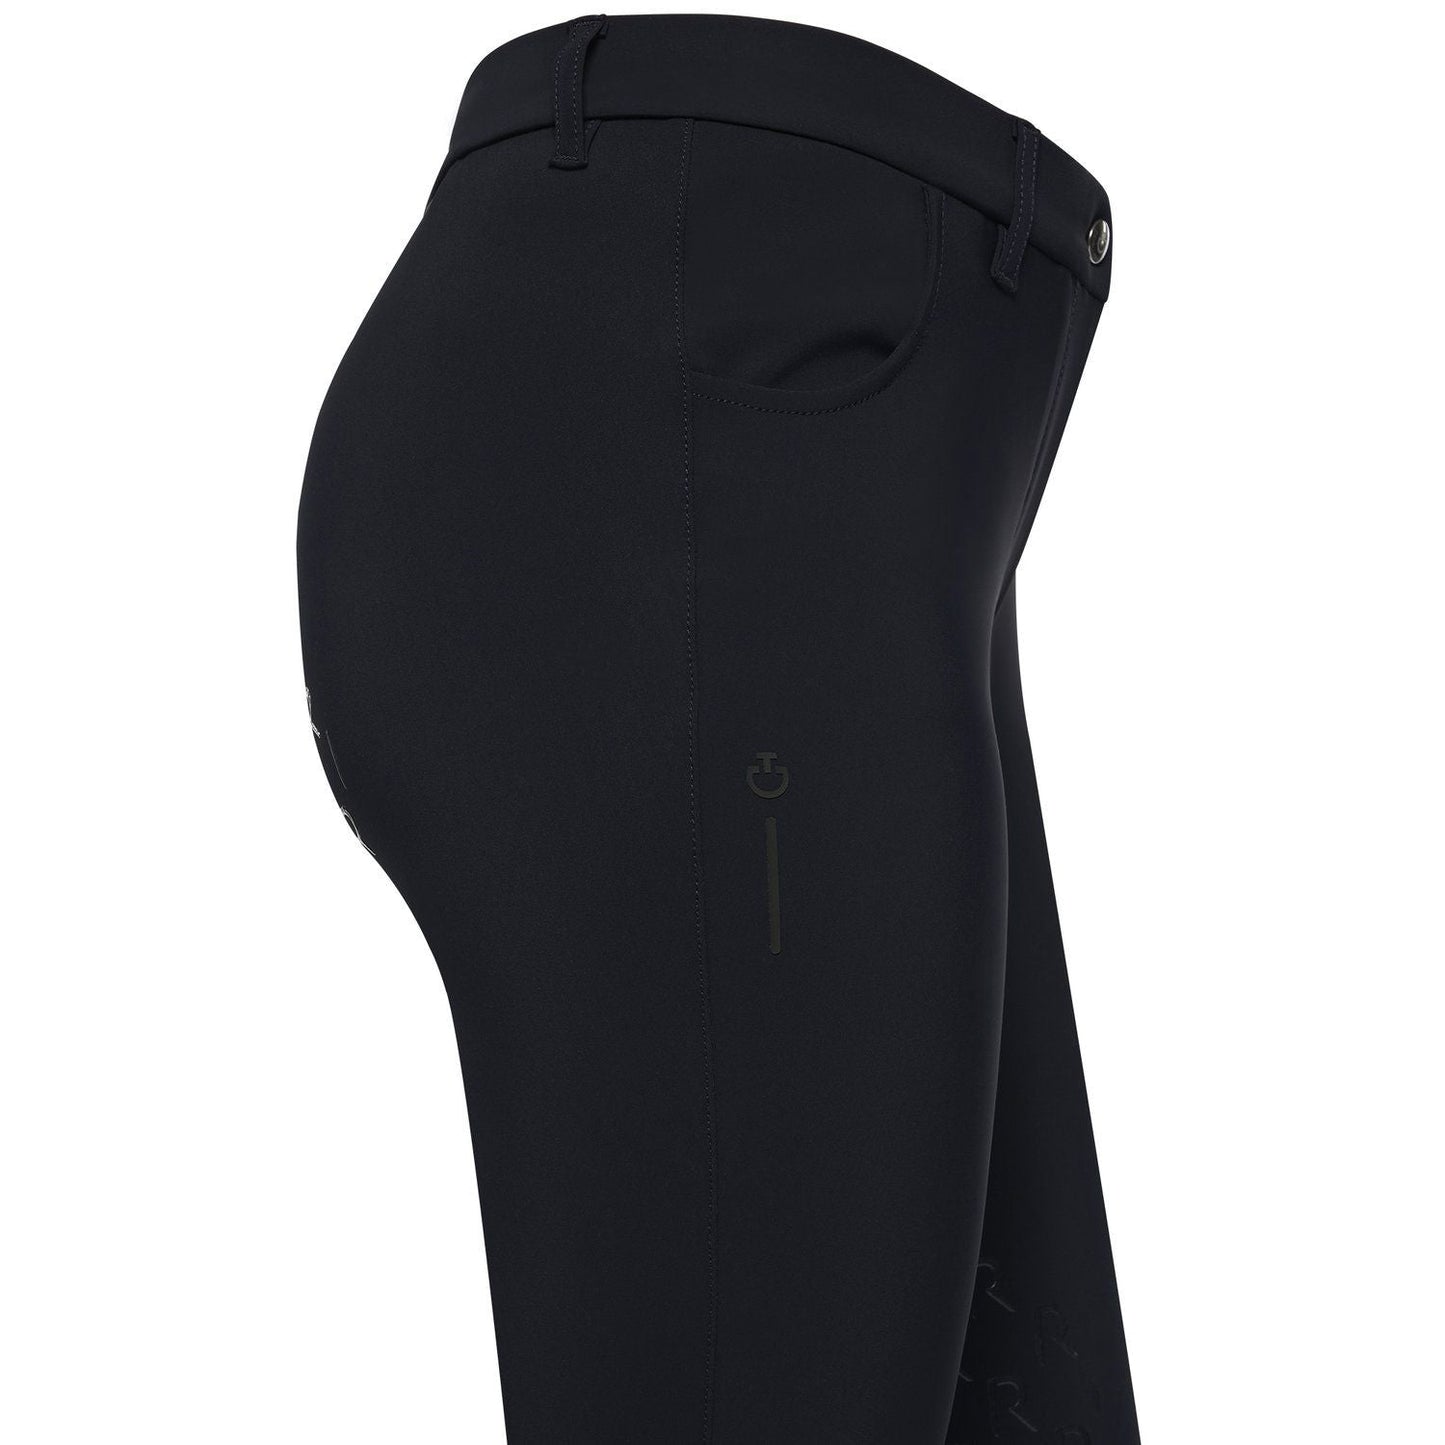 Cavalleria Toscana Ladies Revolution Full Grip Breeches-Trailrace Equestrian Outfitters-The Equestrian